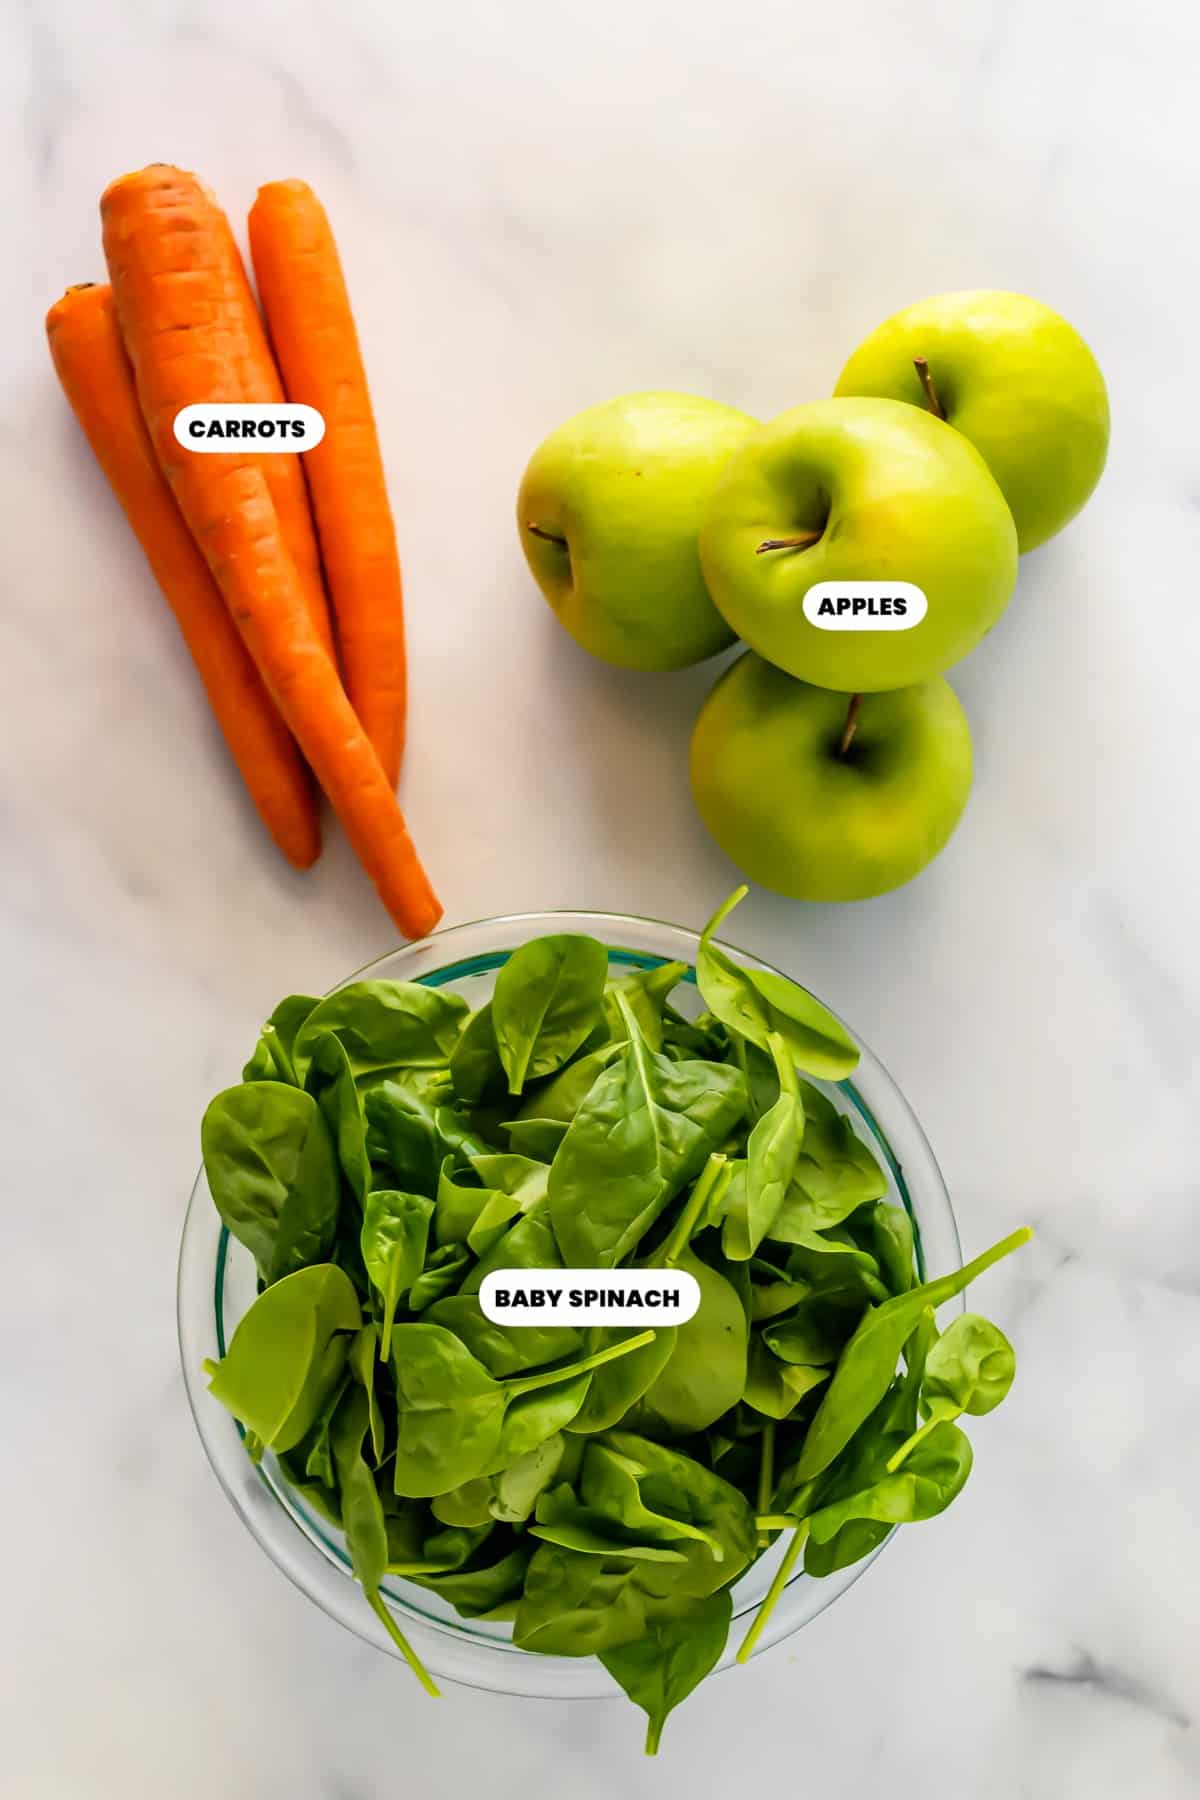 Photo of the ingredients needed to make a green juice.